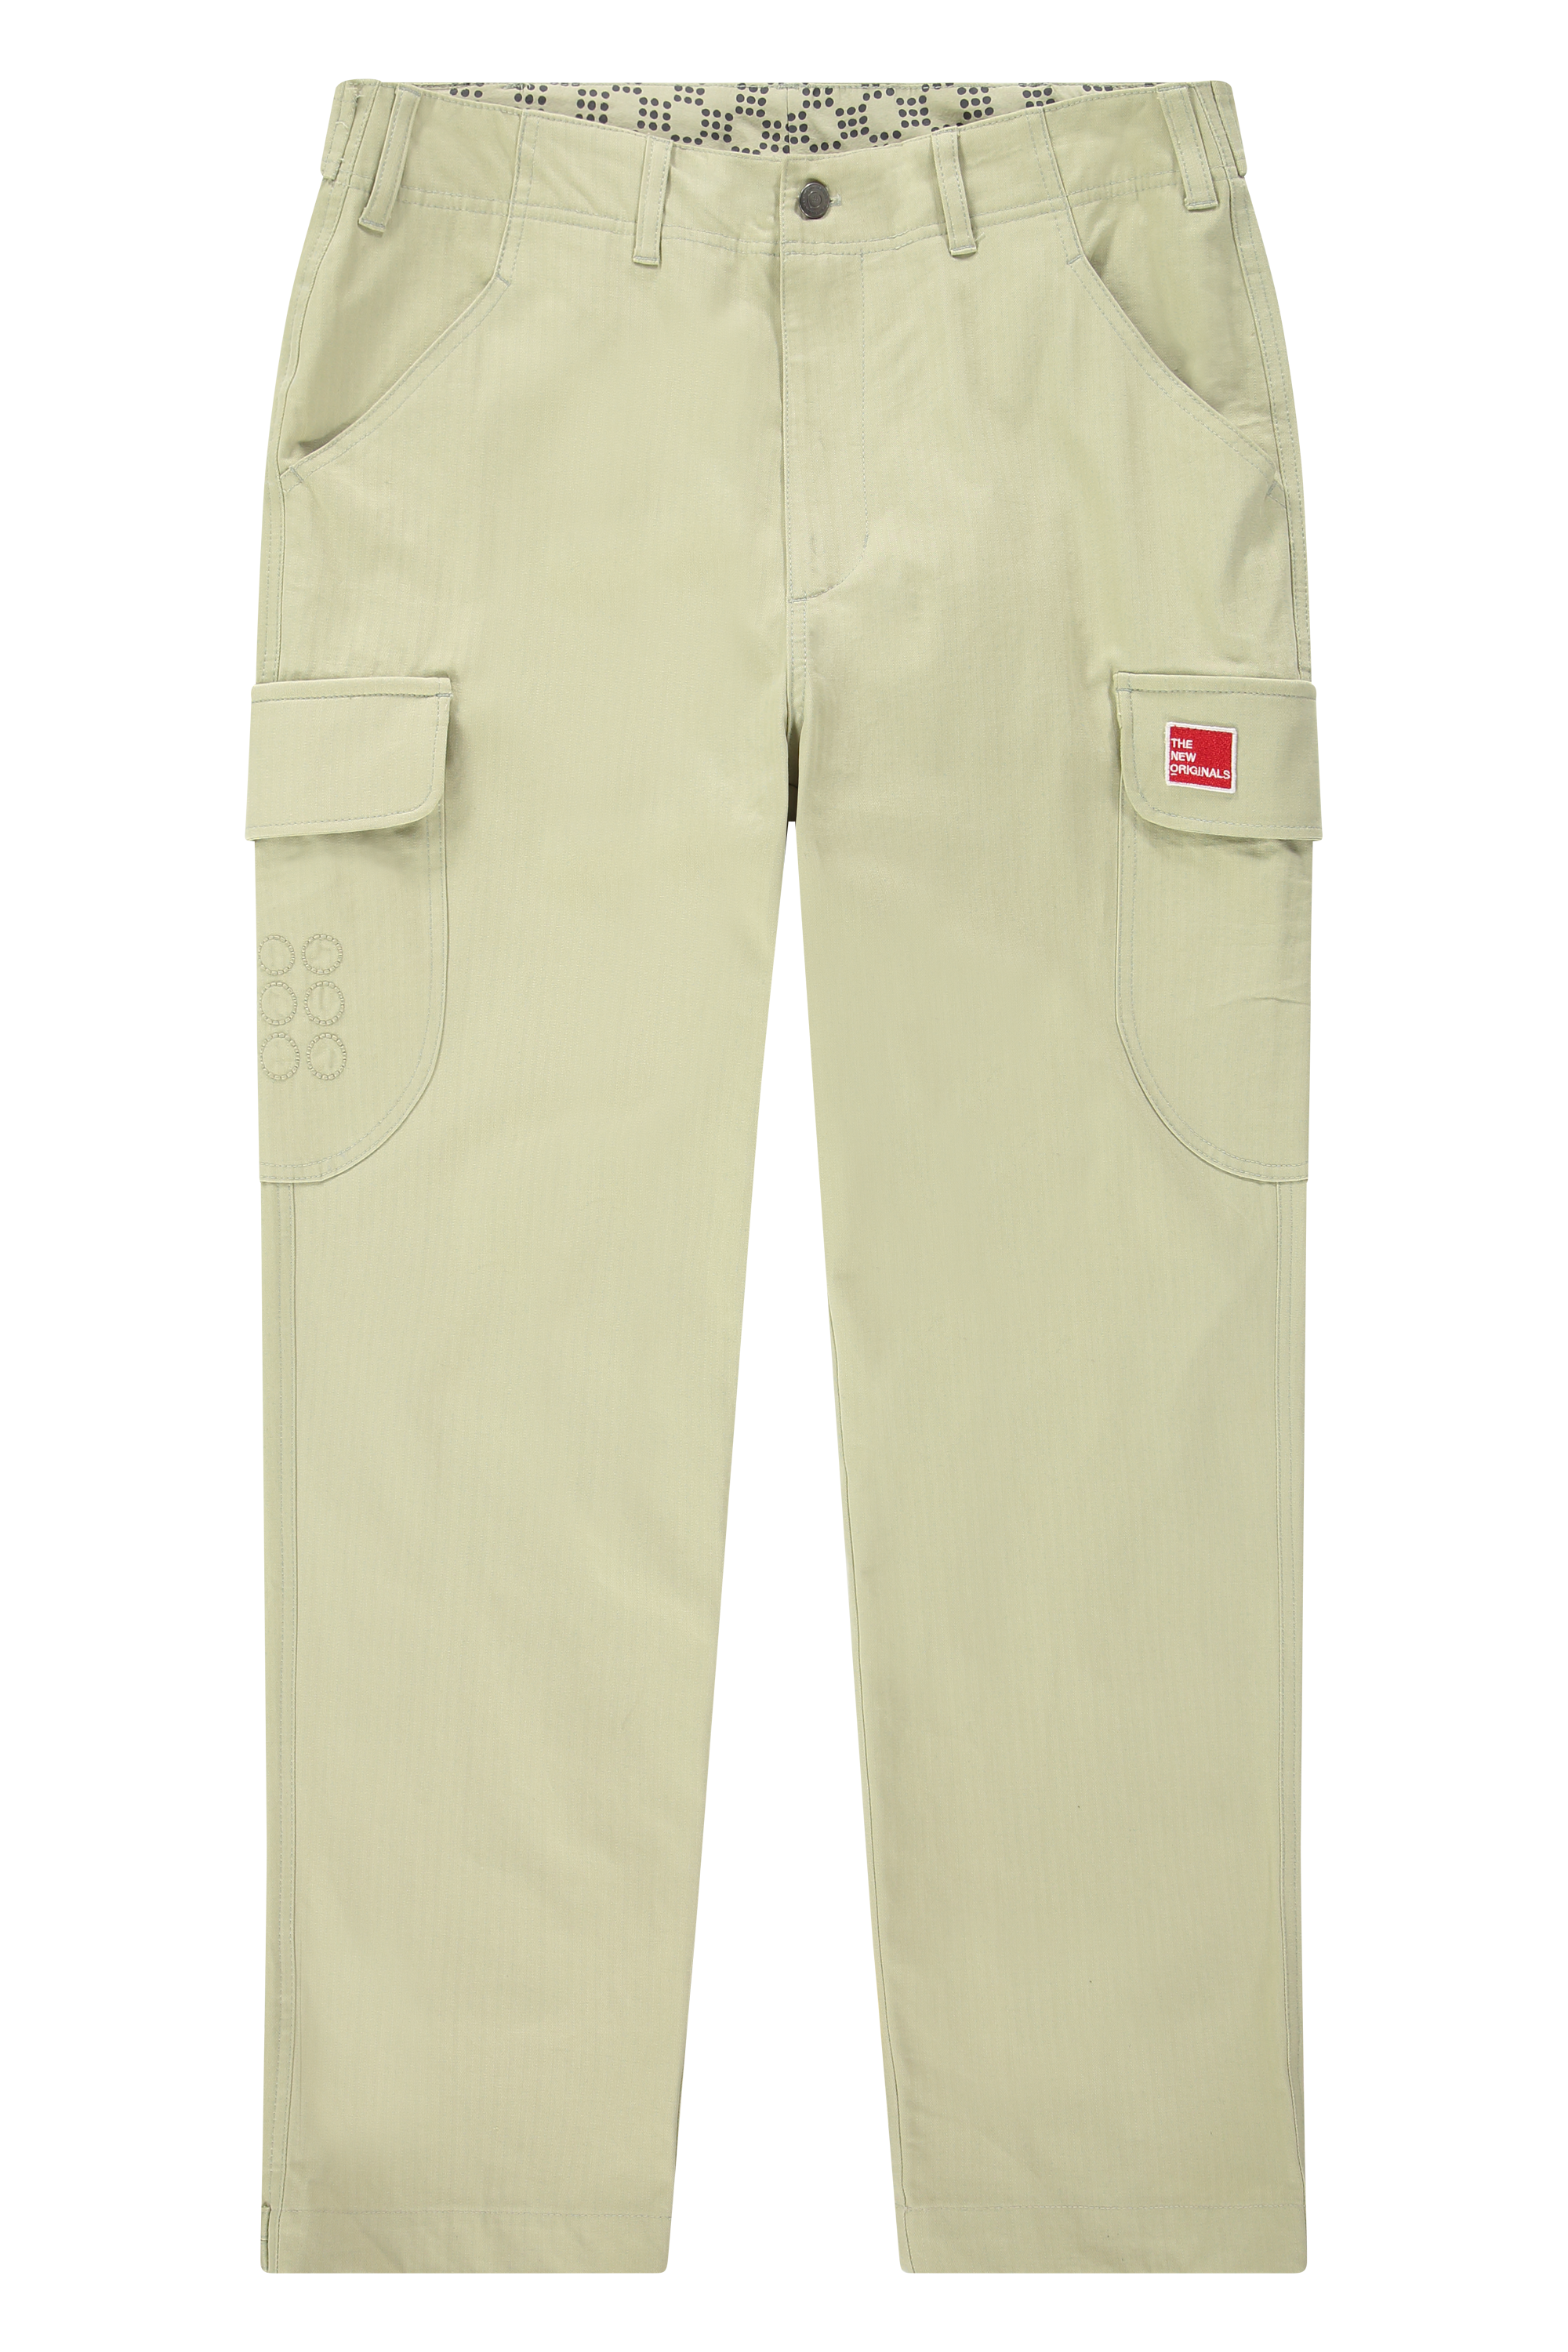 products-pants_kaki_front-png